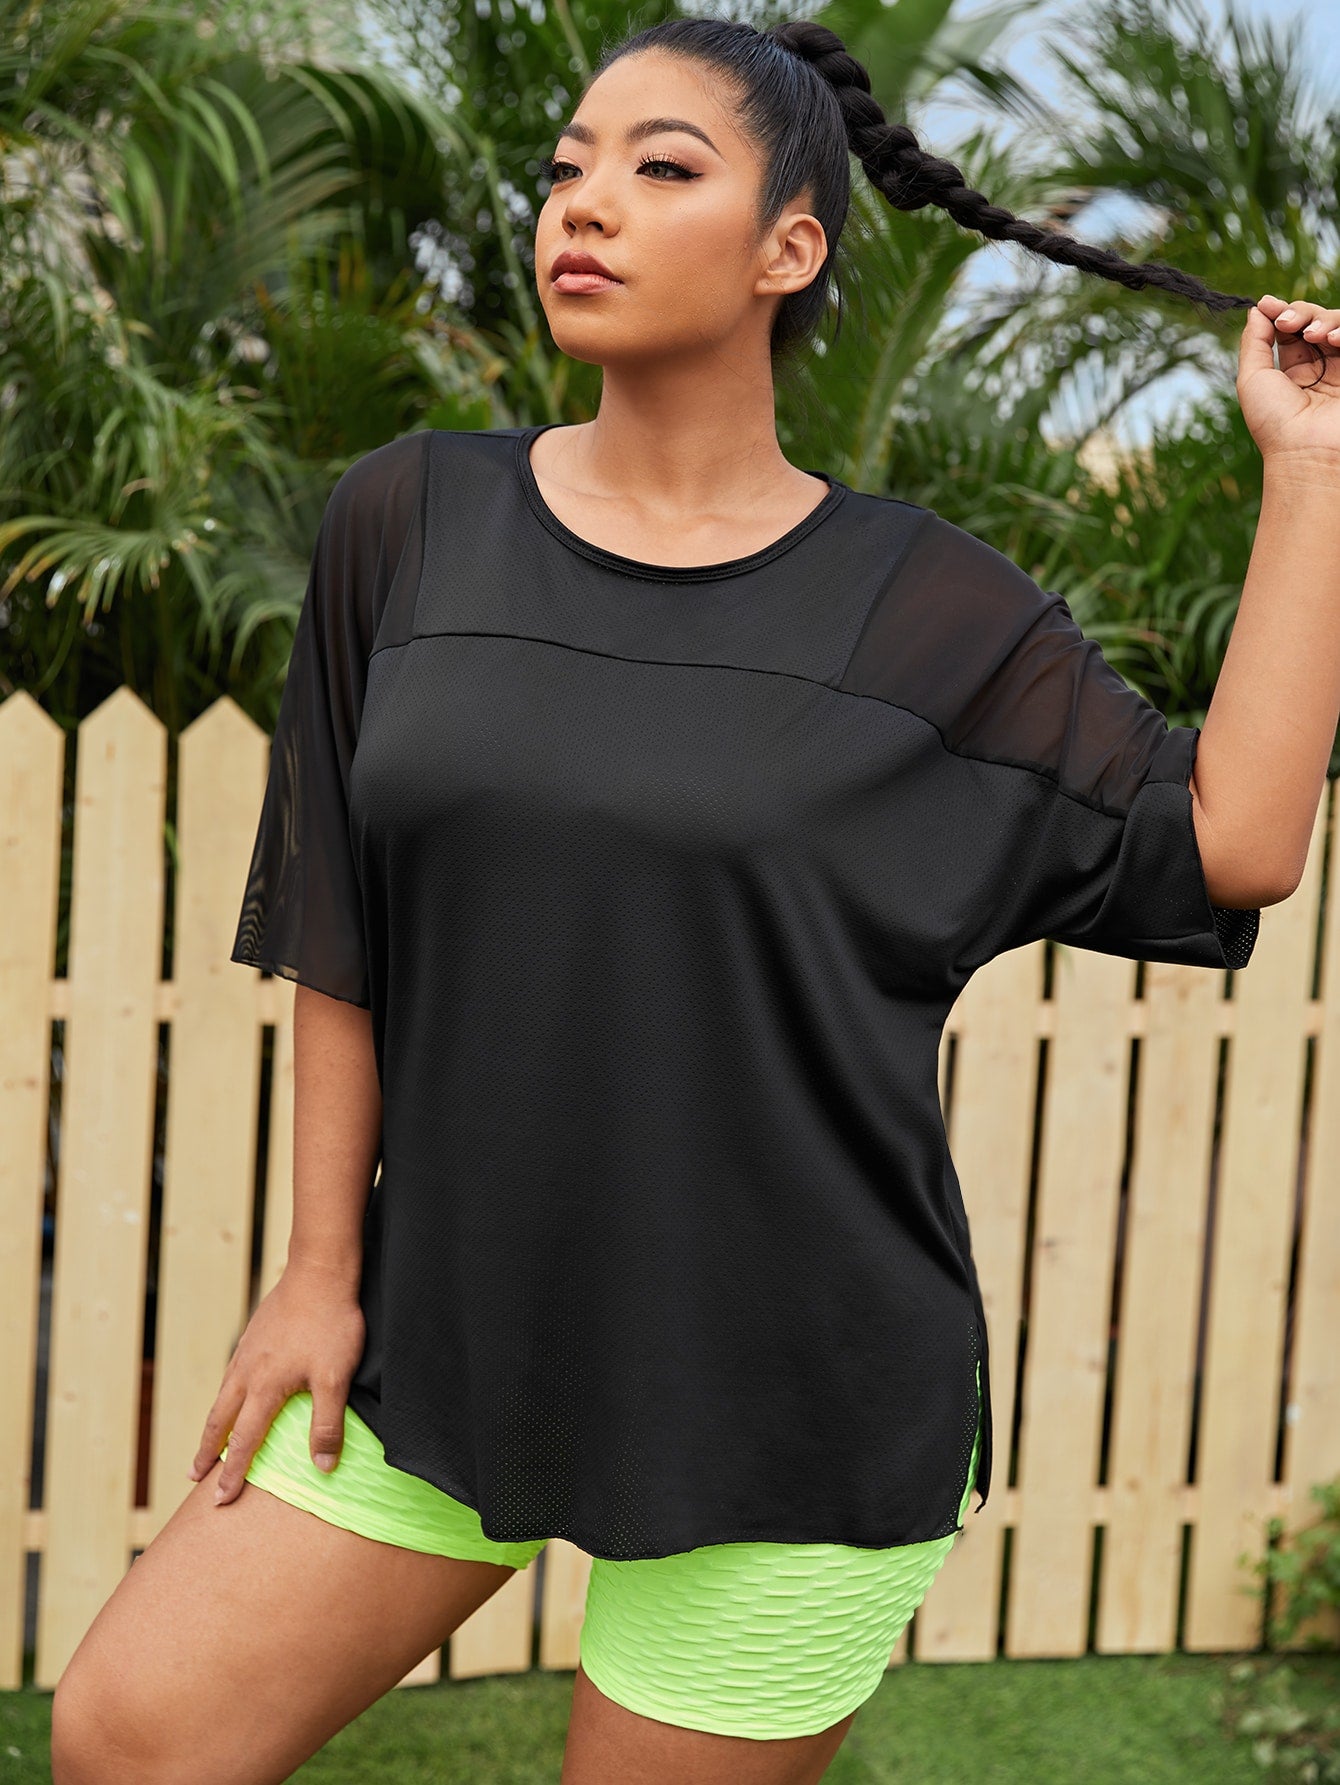 Plus Size Yoga Top - Mesh Sports Tee - Personal Hour for Yoga and Meditations 